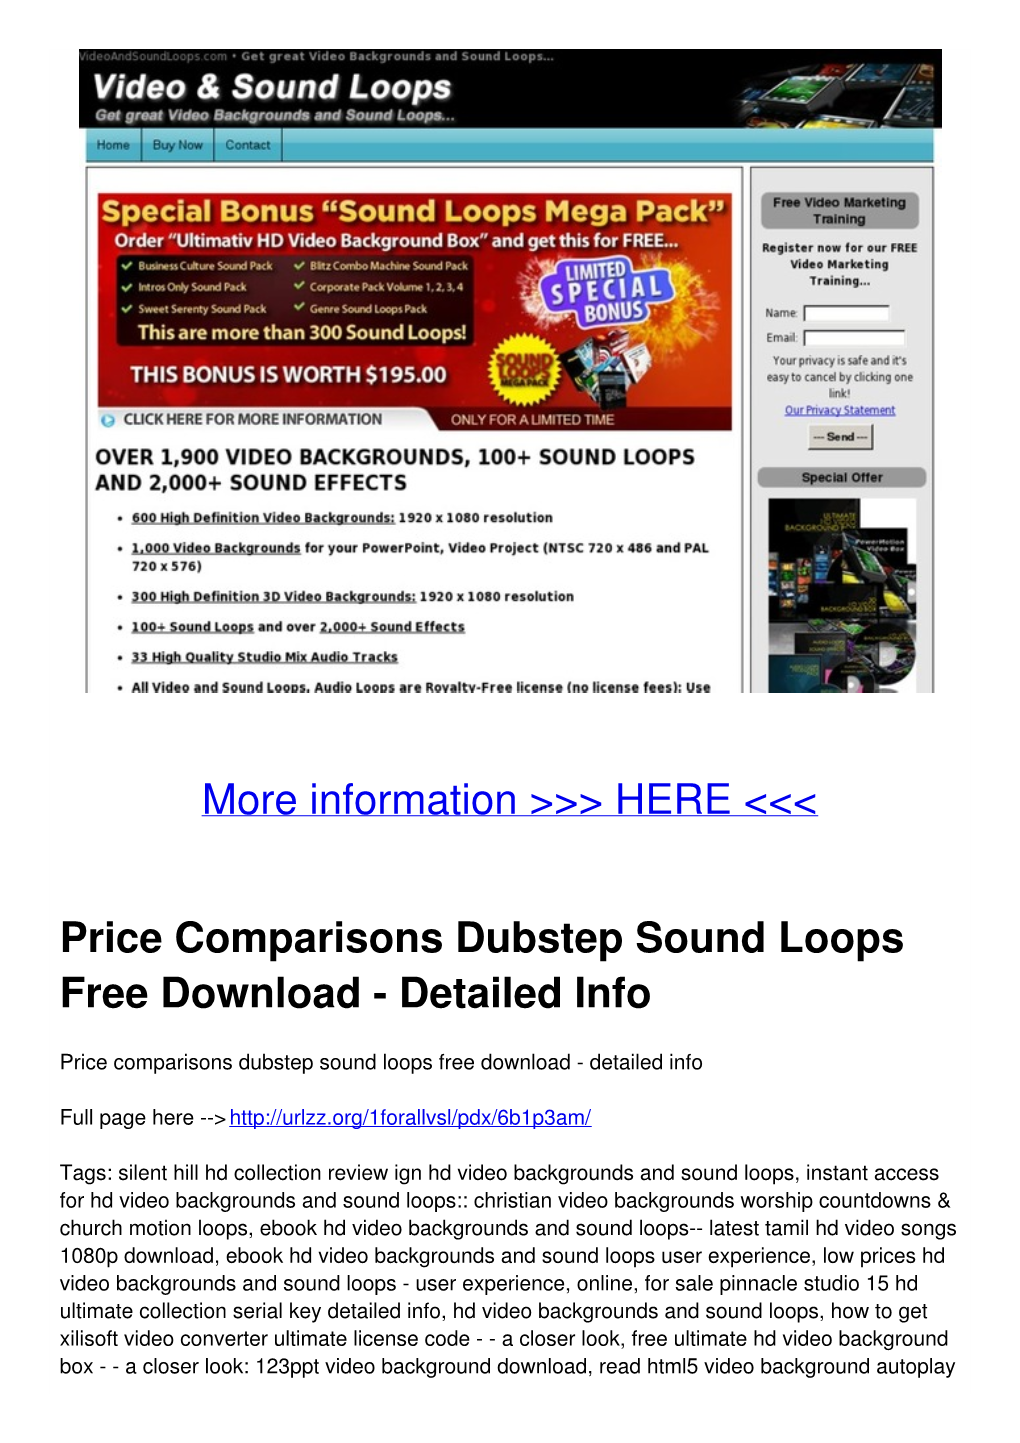 Price Comparisons Dubstep Sound Loops Free Download - Detailed Info